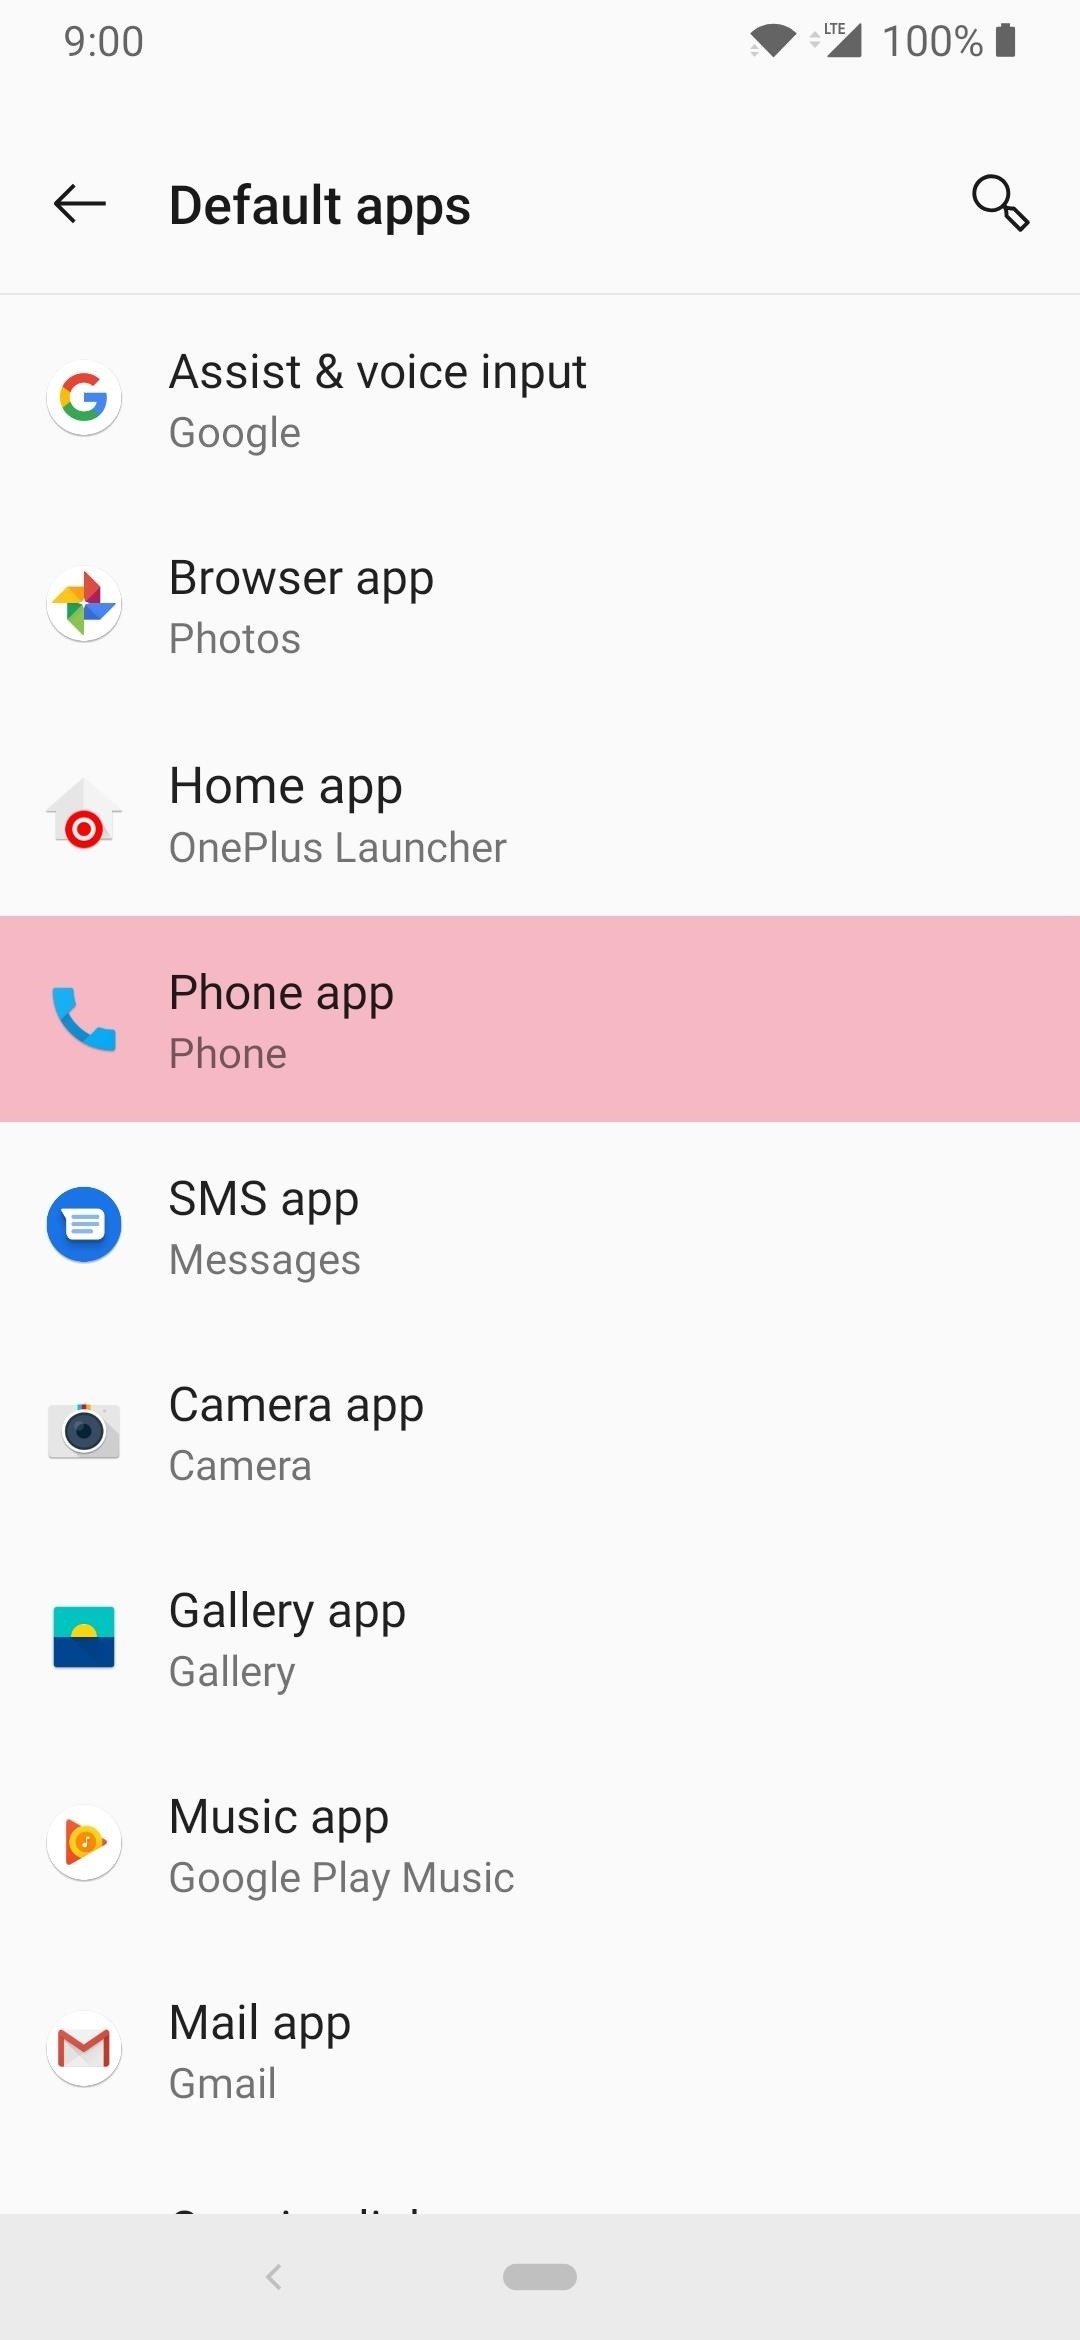 How to Get the Google Phone App with Spam Blocking & Business Search on Any Android Phone